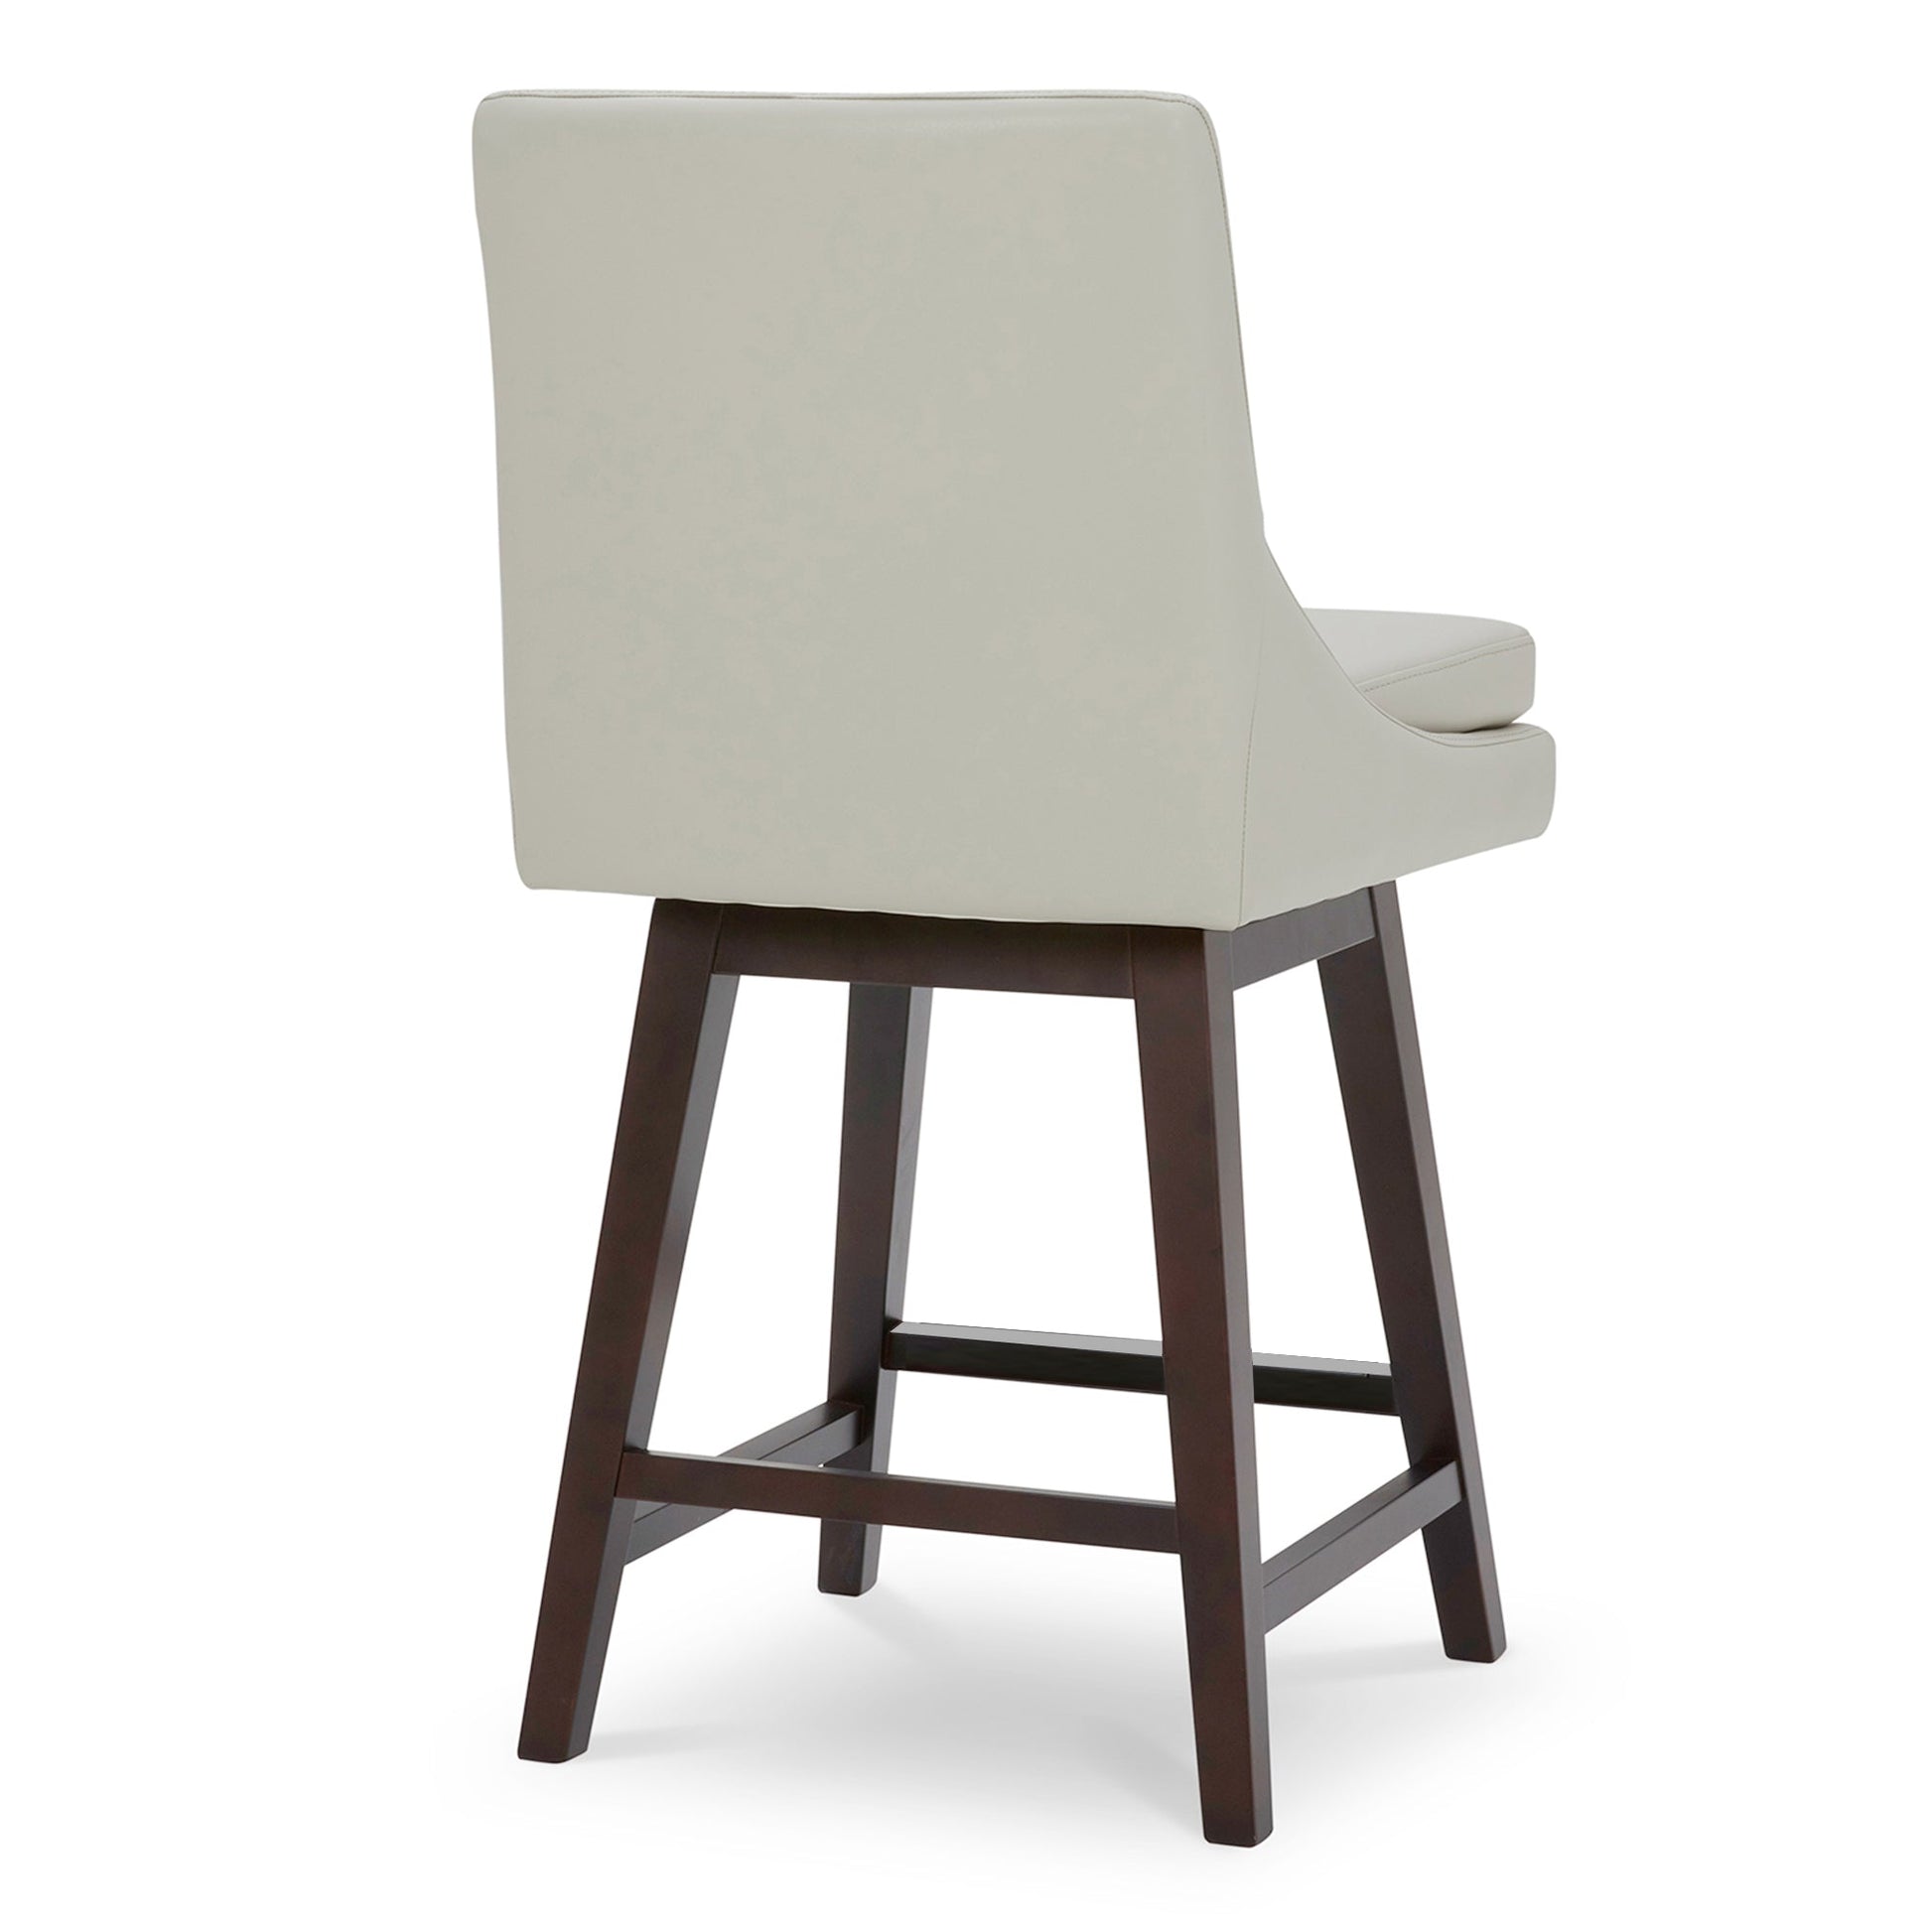 CHITA LIVING-Lissa Swivel Counter Stool 26.8''-Counter Stools-Faux Leather-Light Gray-